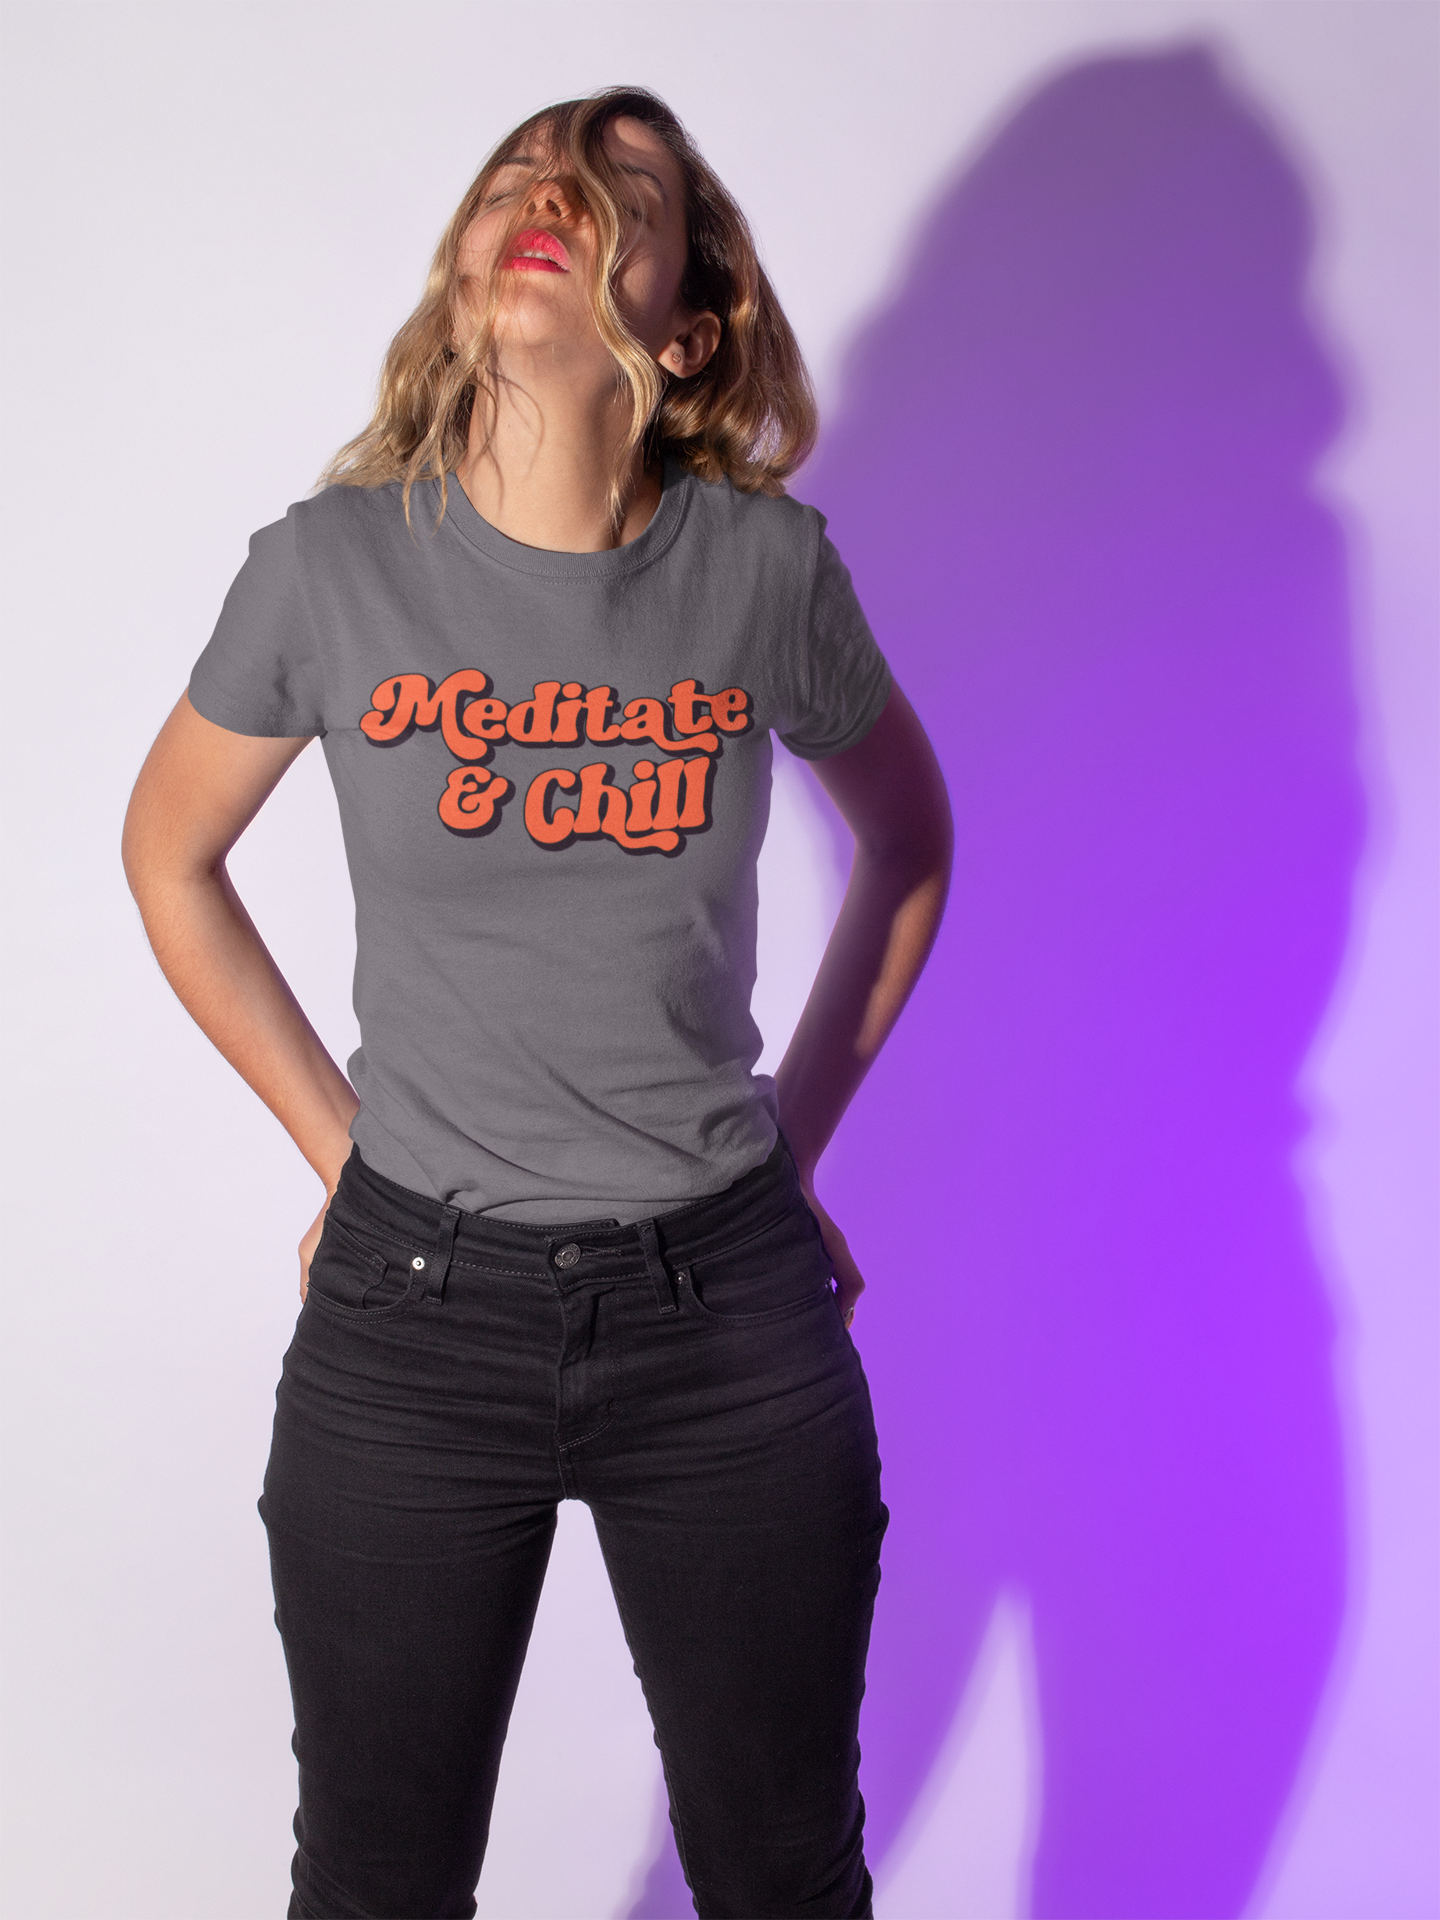 Meditate & Chill Women's Softstyle Tee